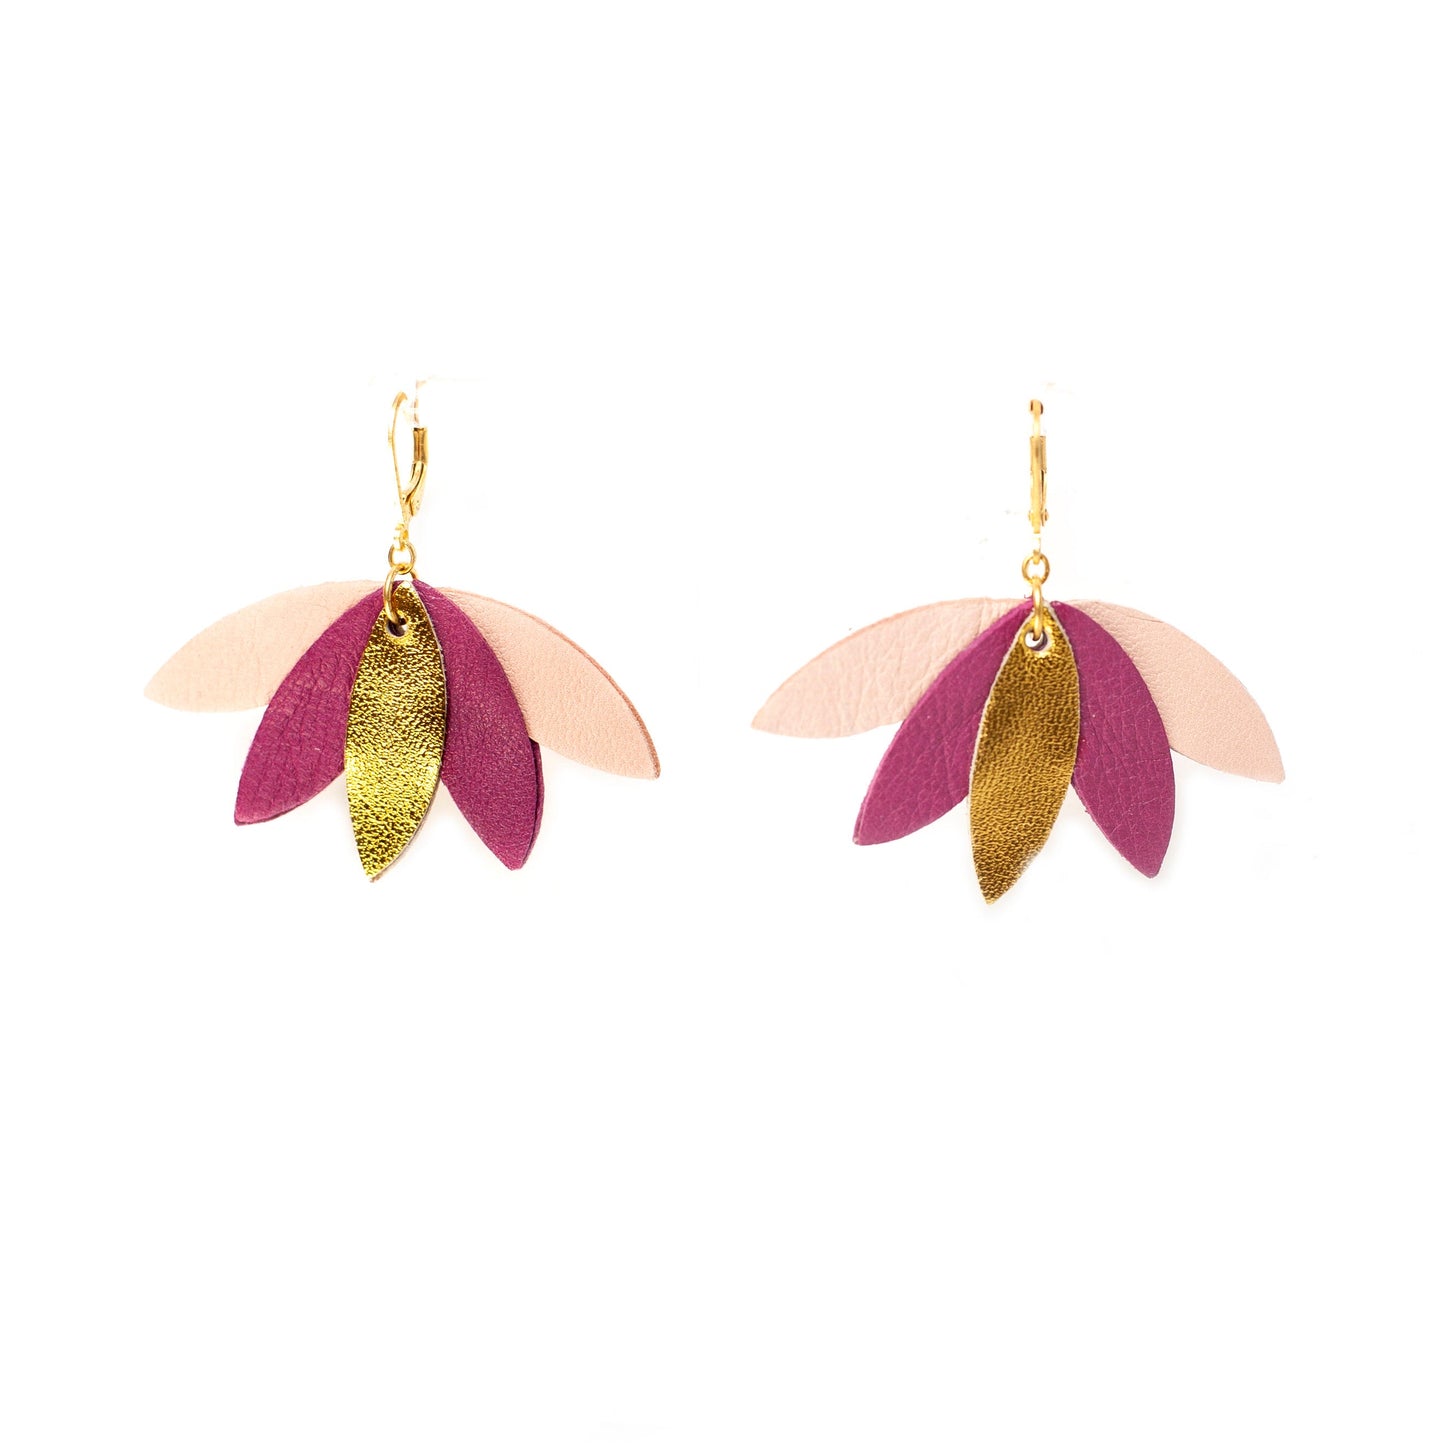 Palm tree earrings in golden pink plum leather